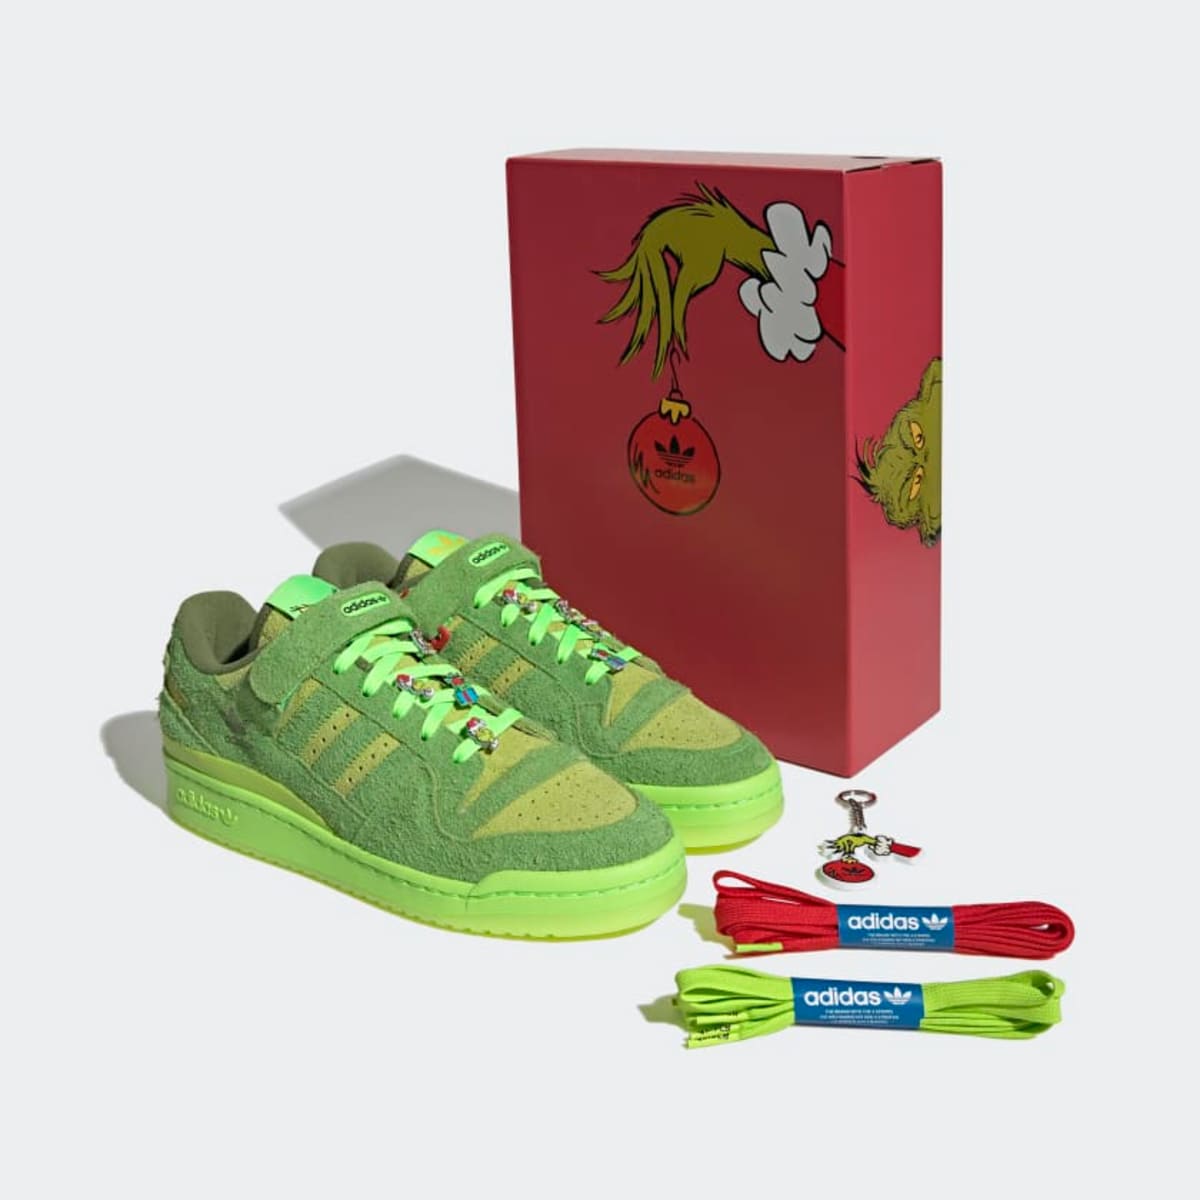 Adidas Forum Low 'Grinch' December 1 - Illustrated FanNation News, Analysis and